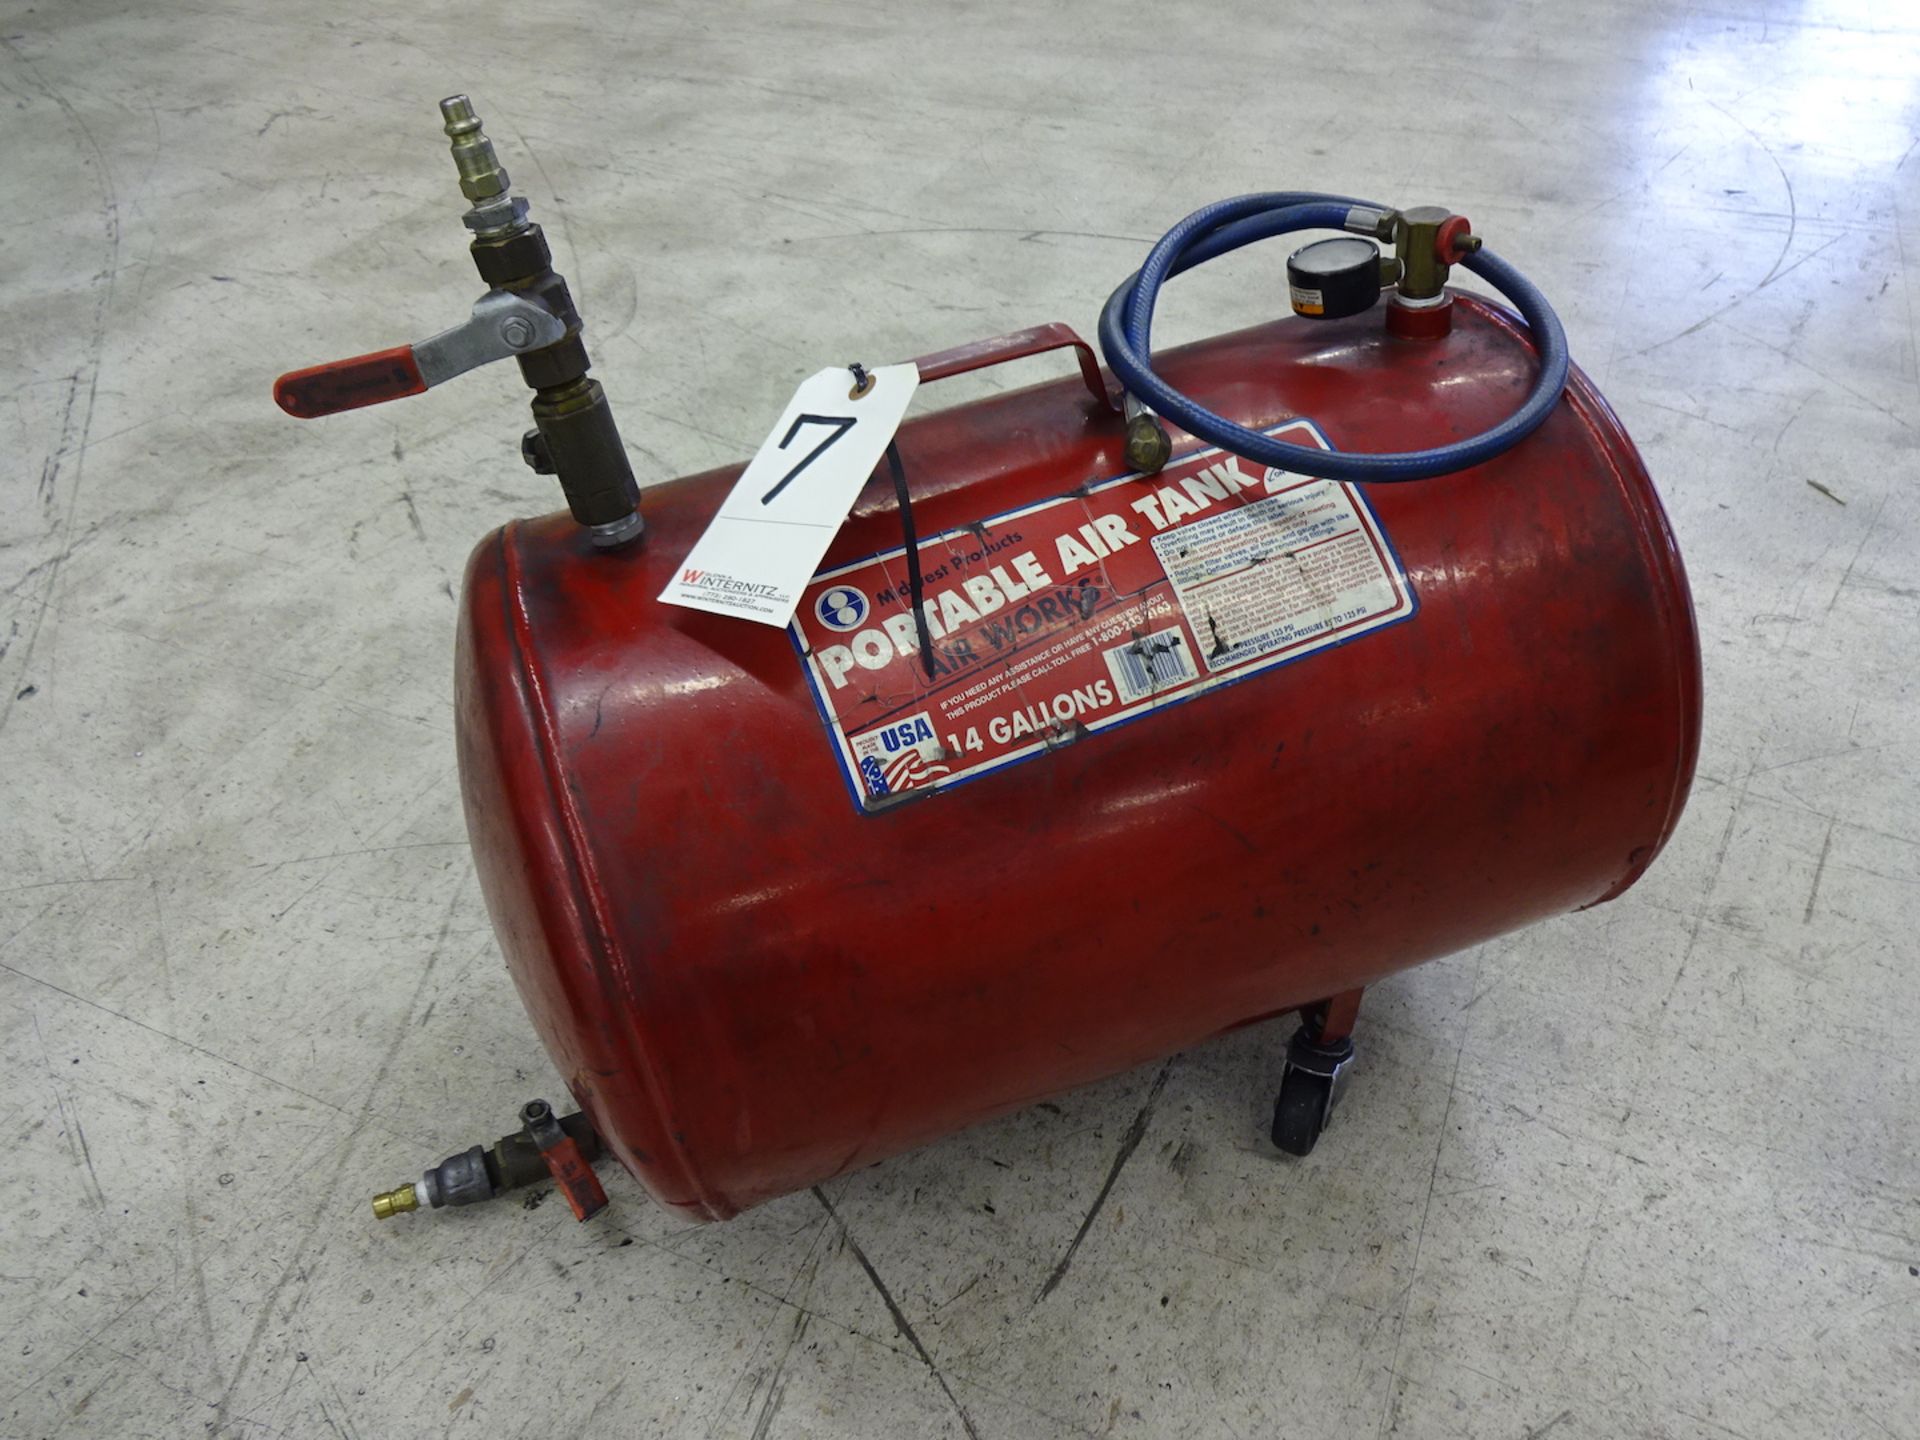 Midwest Products 14 Gallon Portable Air Tank